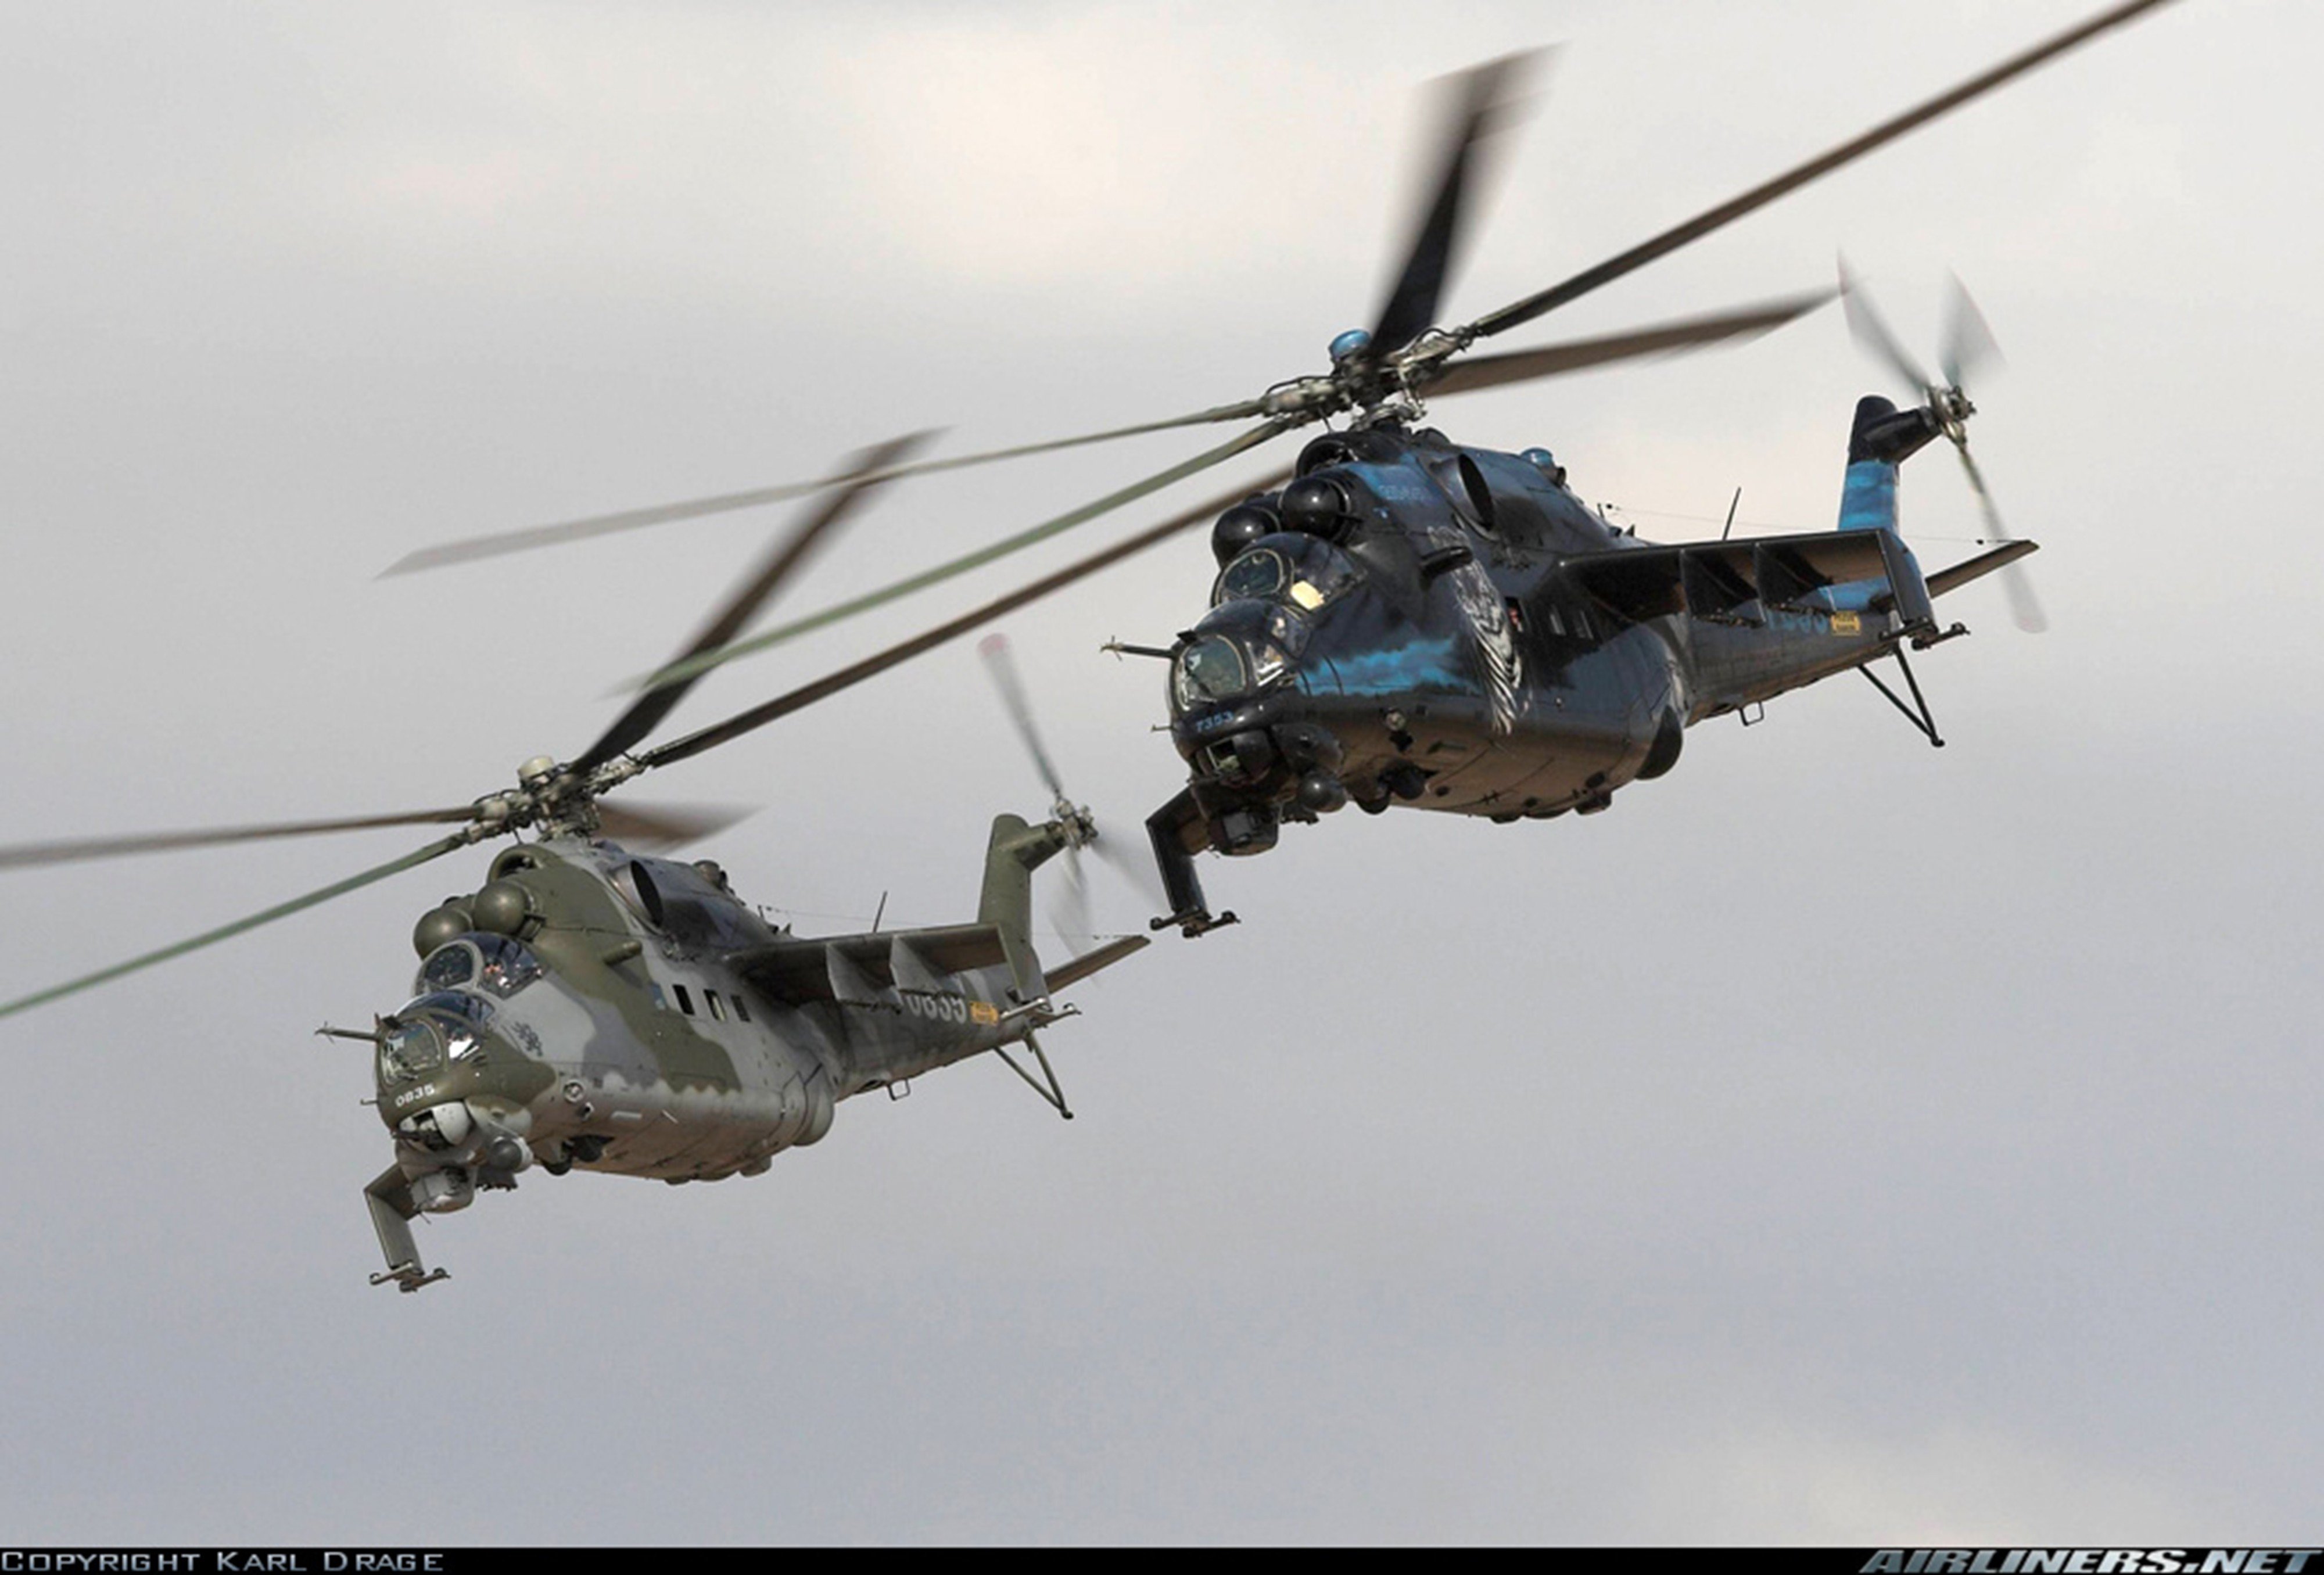 helicopter, Aircraft, Vehicle, Military, Army, Attack, Mil mi, Czech republic, Tiger Wallpaper